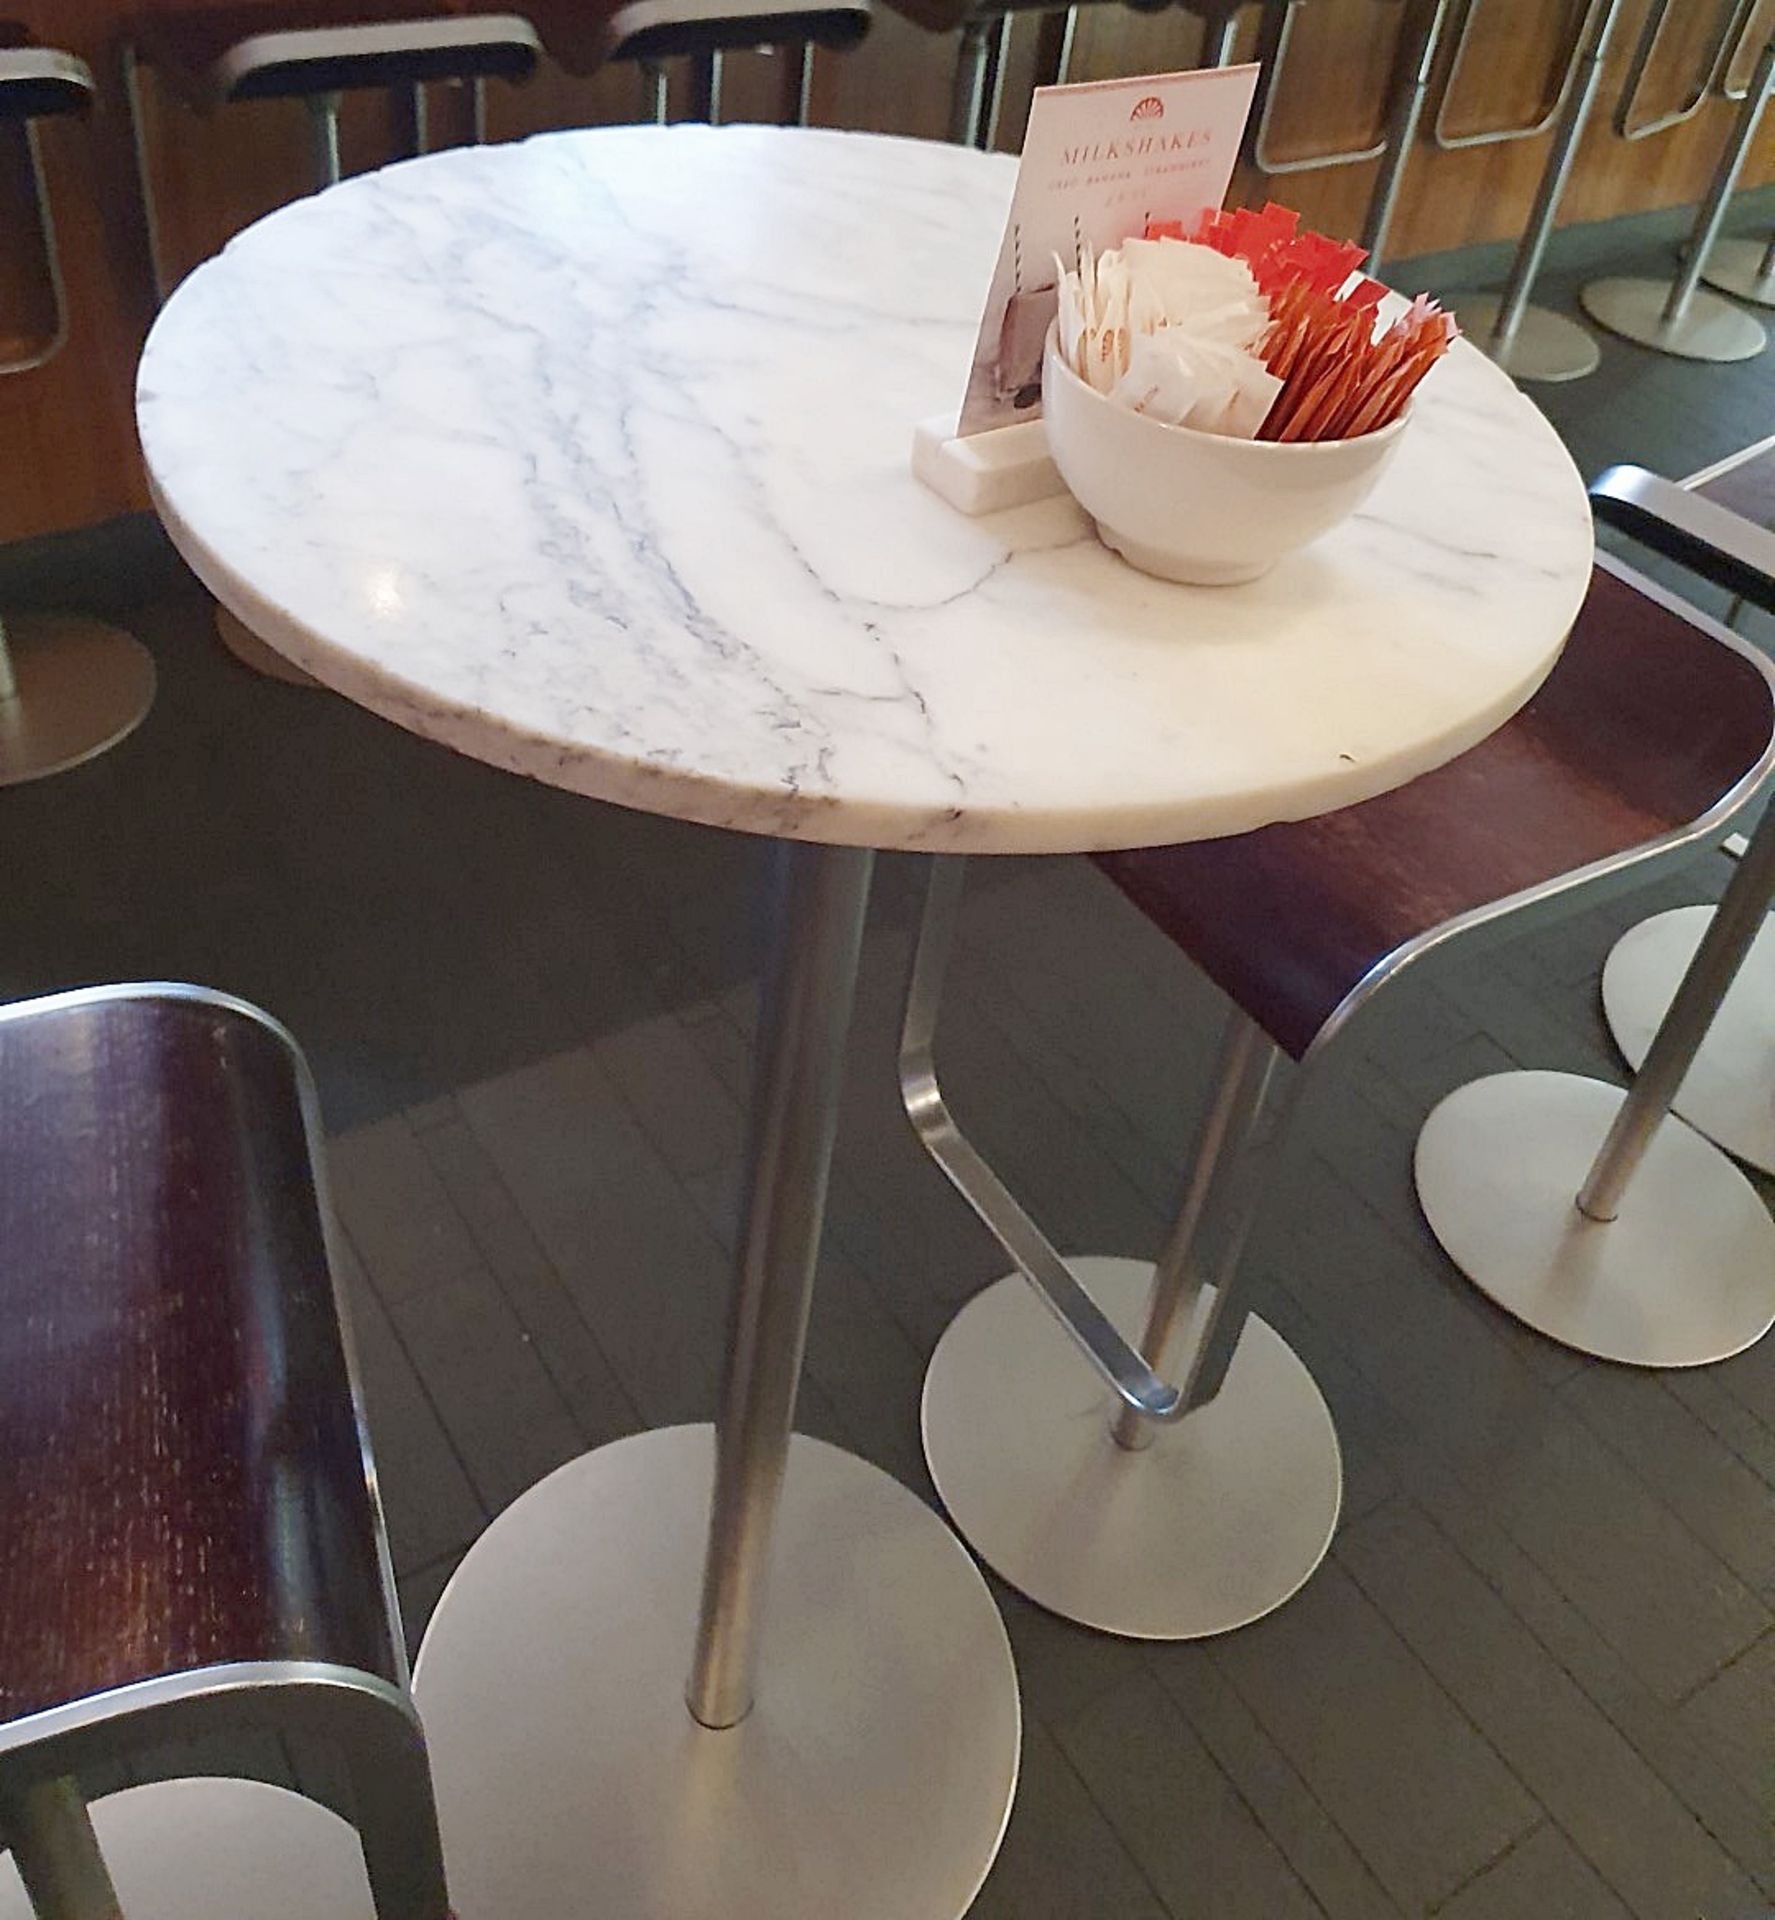 1 x Tall Round Marble/Granite Cocktail Bar Table - Dimensions: Diameter 60cm x Height 111cm - Ref: - Image 3 of 6